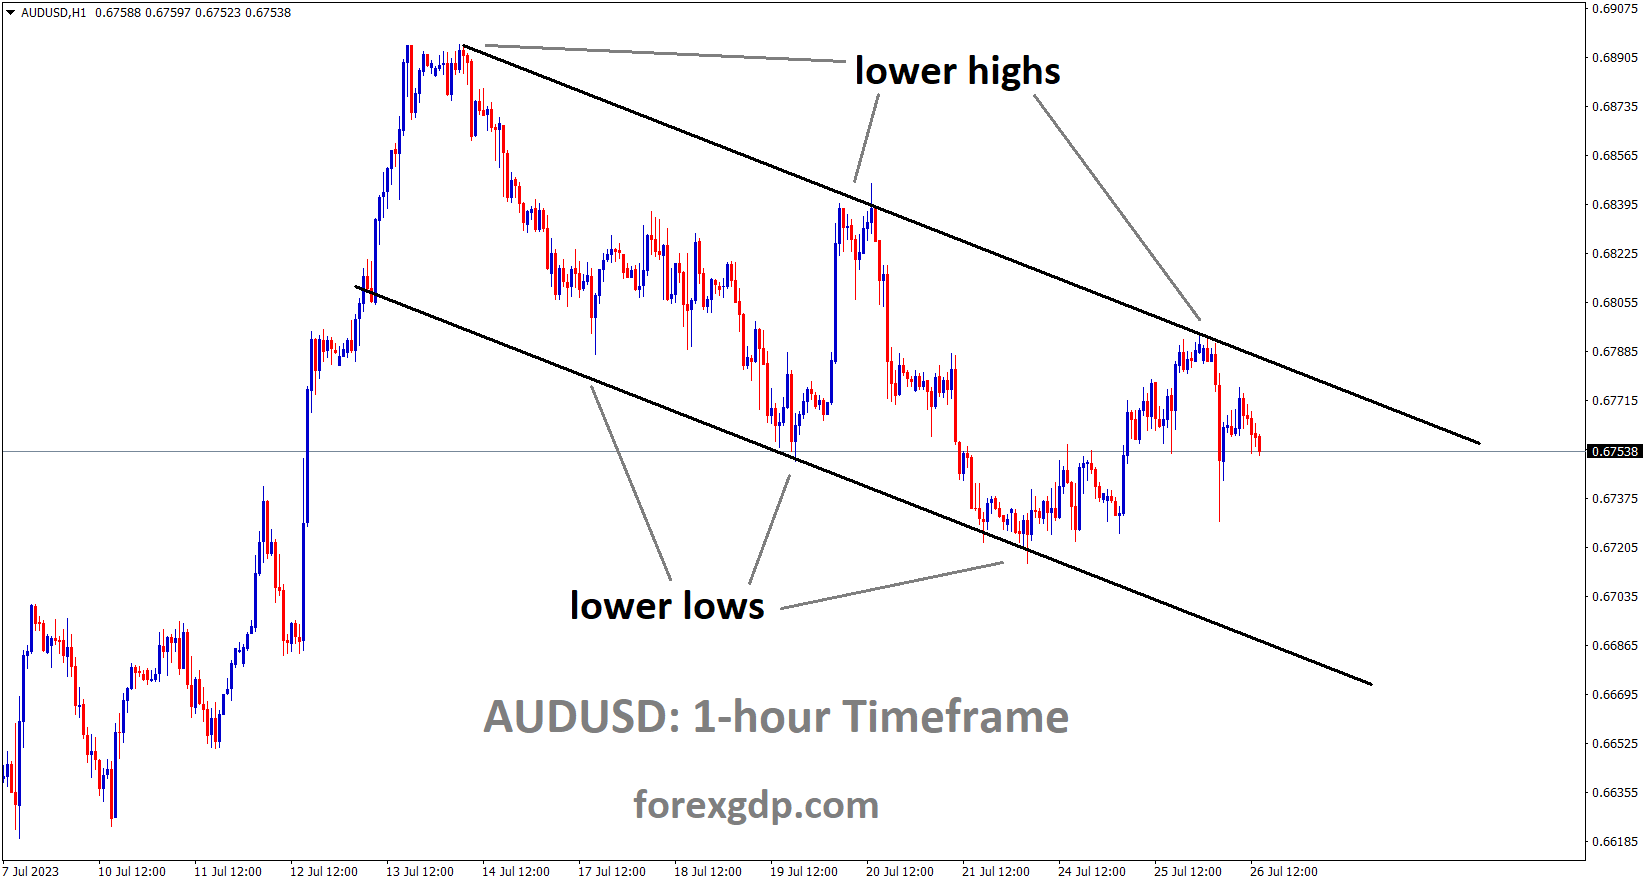 AUDUSD H1 TF analysis Market is moving in the Descending channel and the market has fallen from the lower high area of the channel